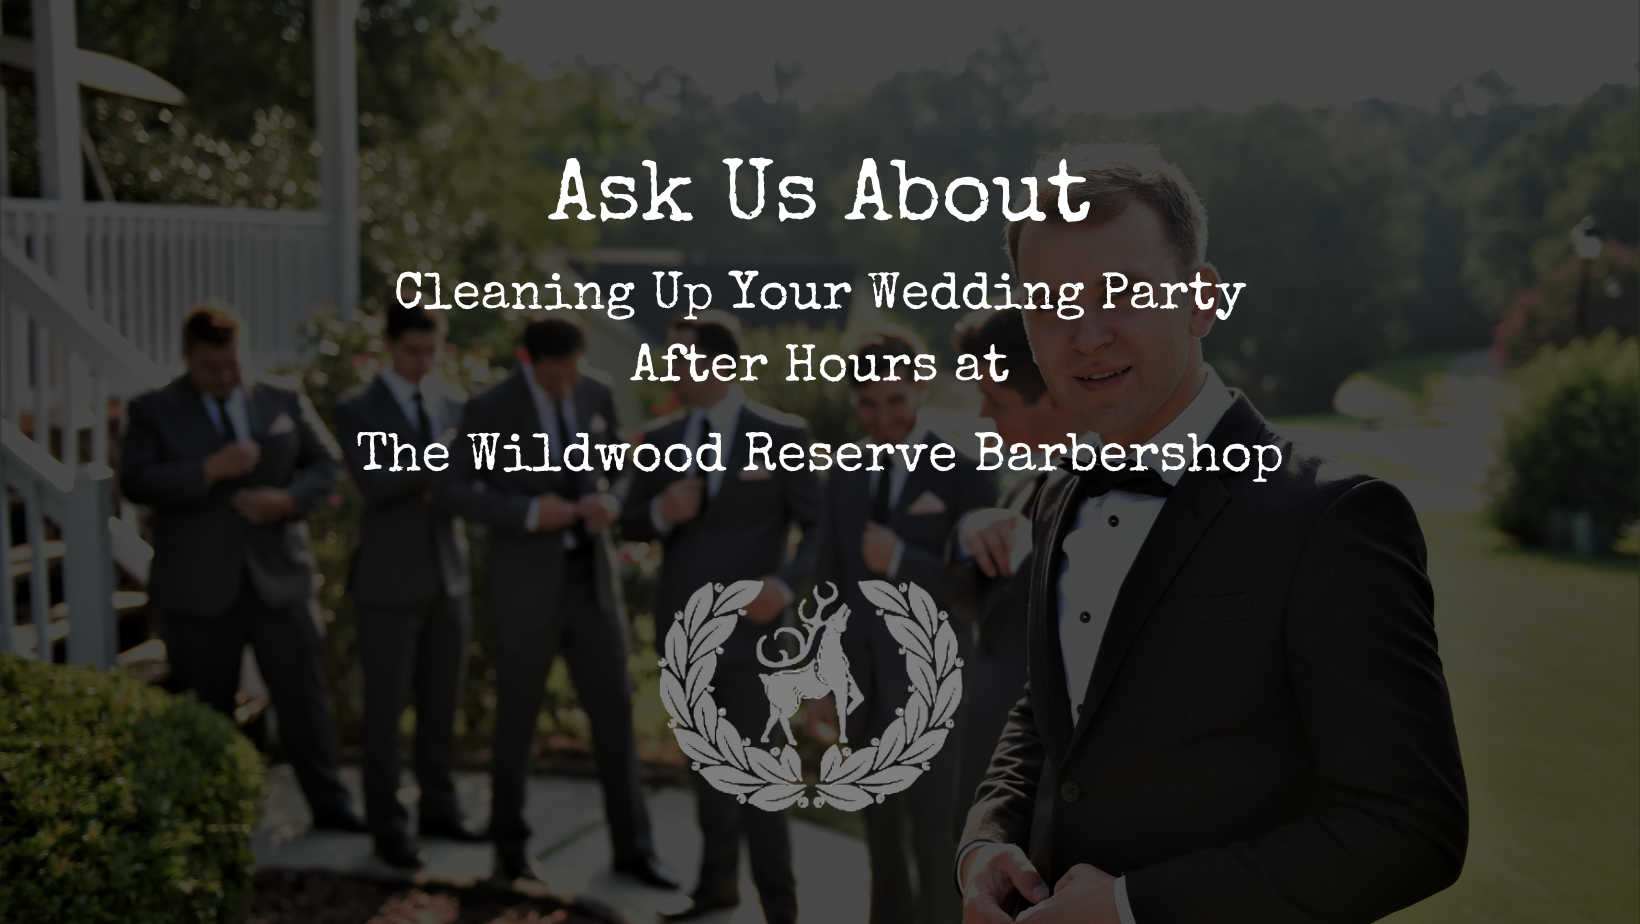 Ask Us About Cleaning Up Your Wedding Party After House at The Wildwood Reserve Barbershop